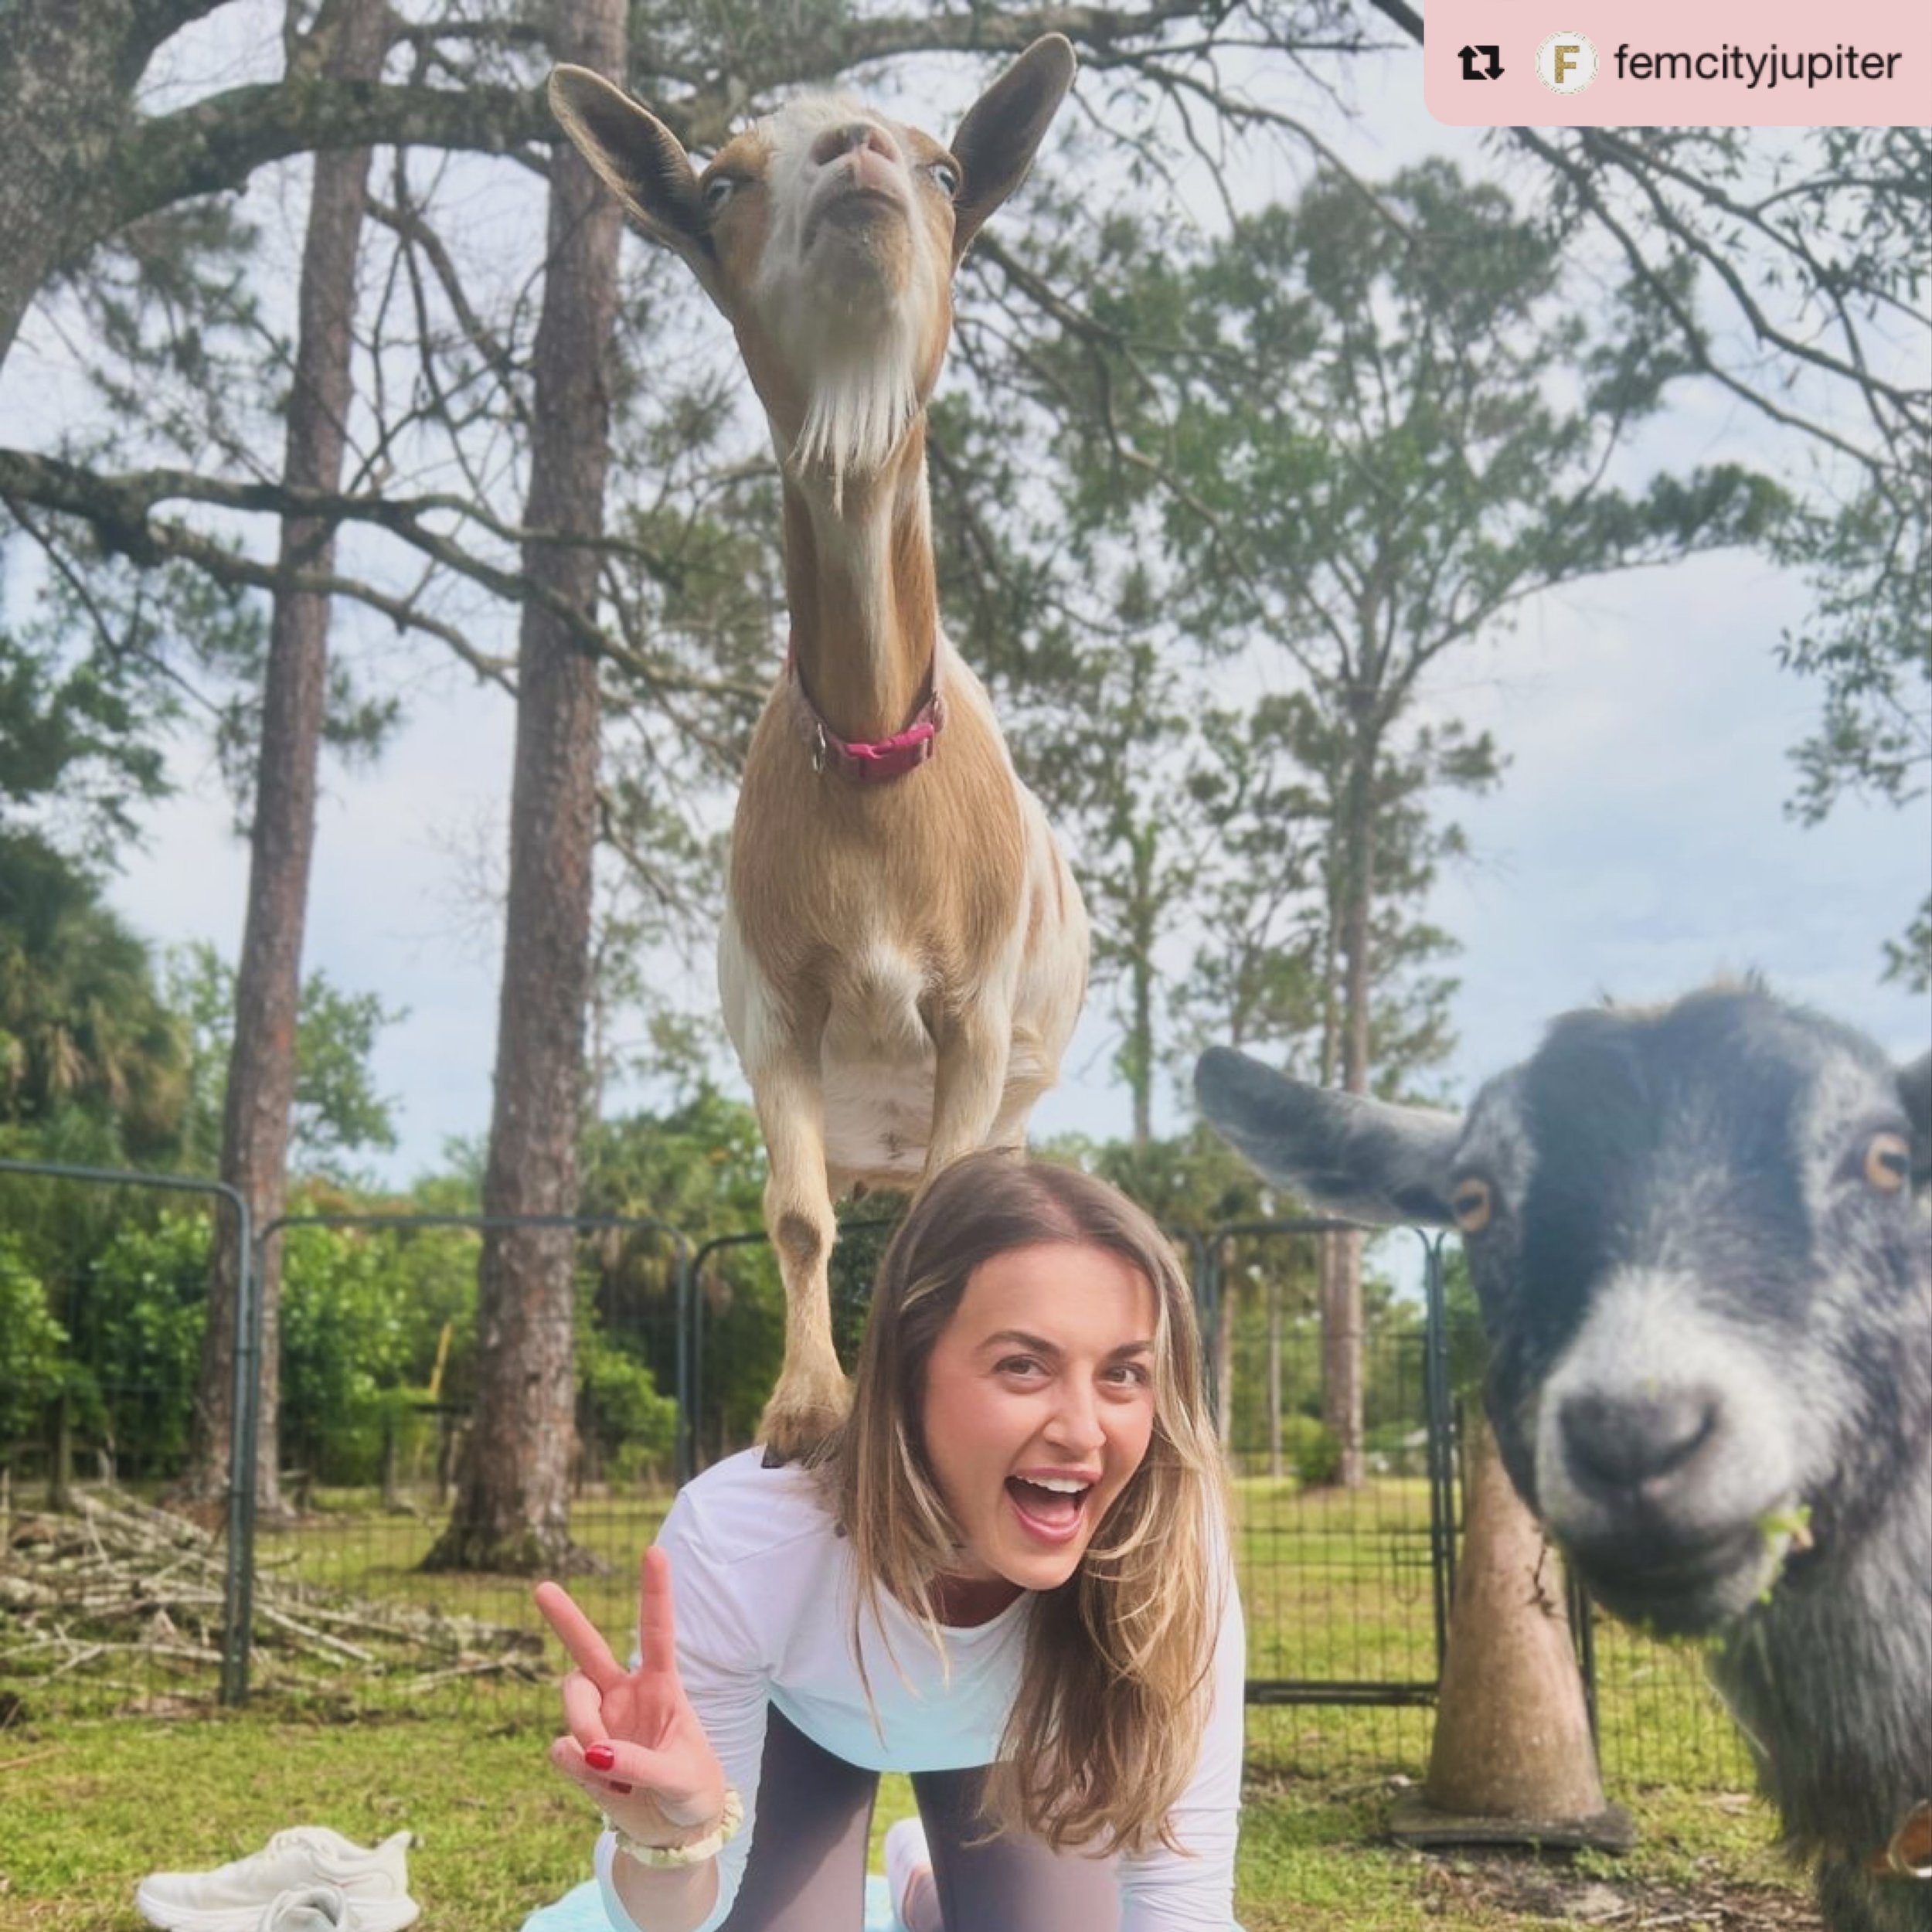 Repost from @femcityjupiter
&bull;
Oh my goatness! 😍🐐

Goat Yoga with @downwardgoat at @groovygoatfarmfl was certainly an evening to remember! 🩷

We cannot wait to share tons of photos and videos over the next few days, so stay tuned! But for now,